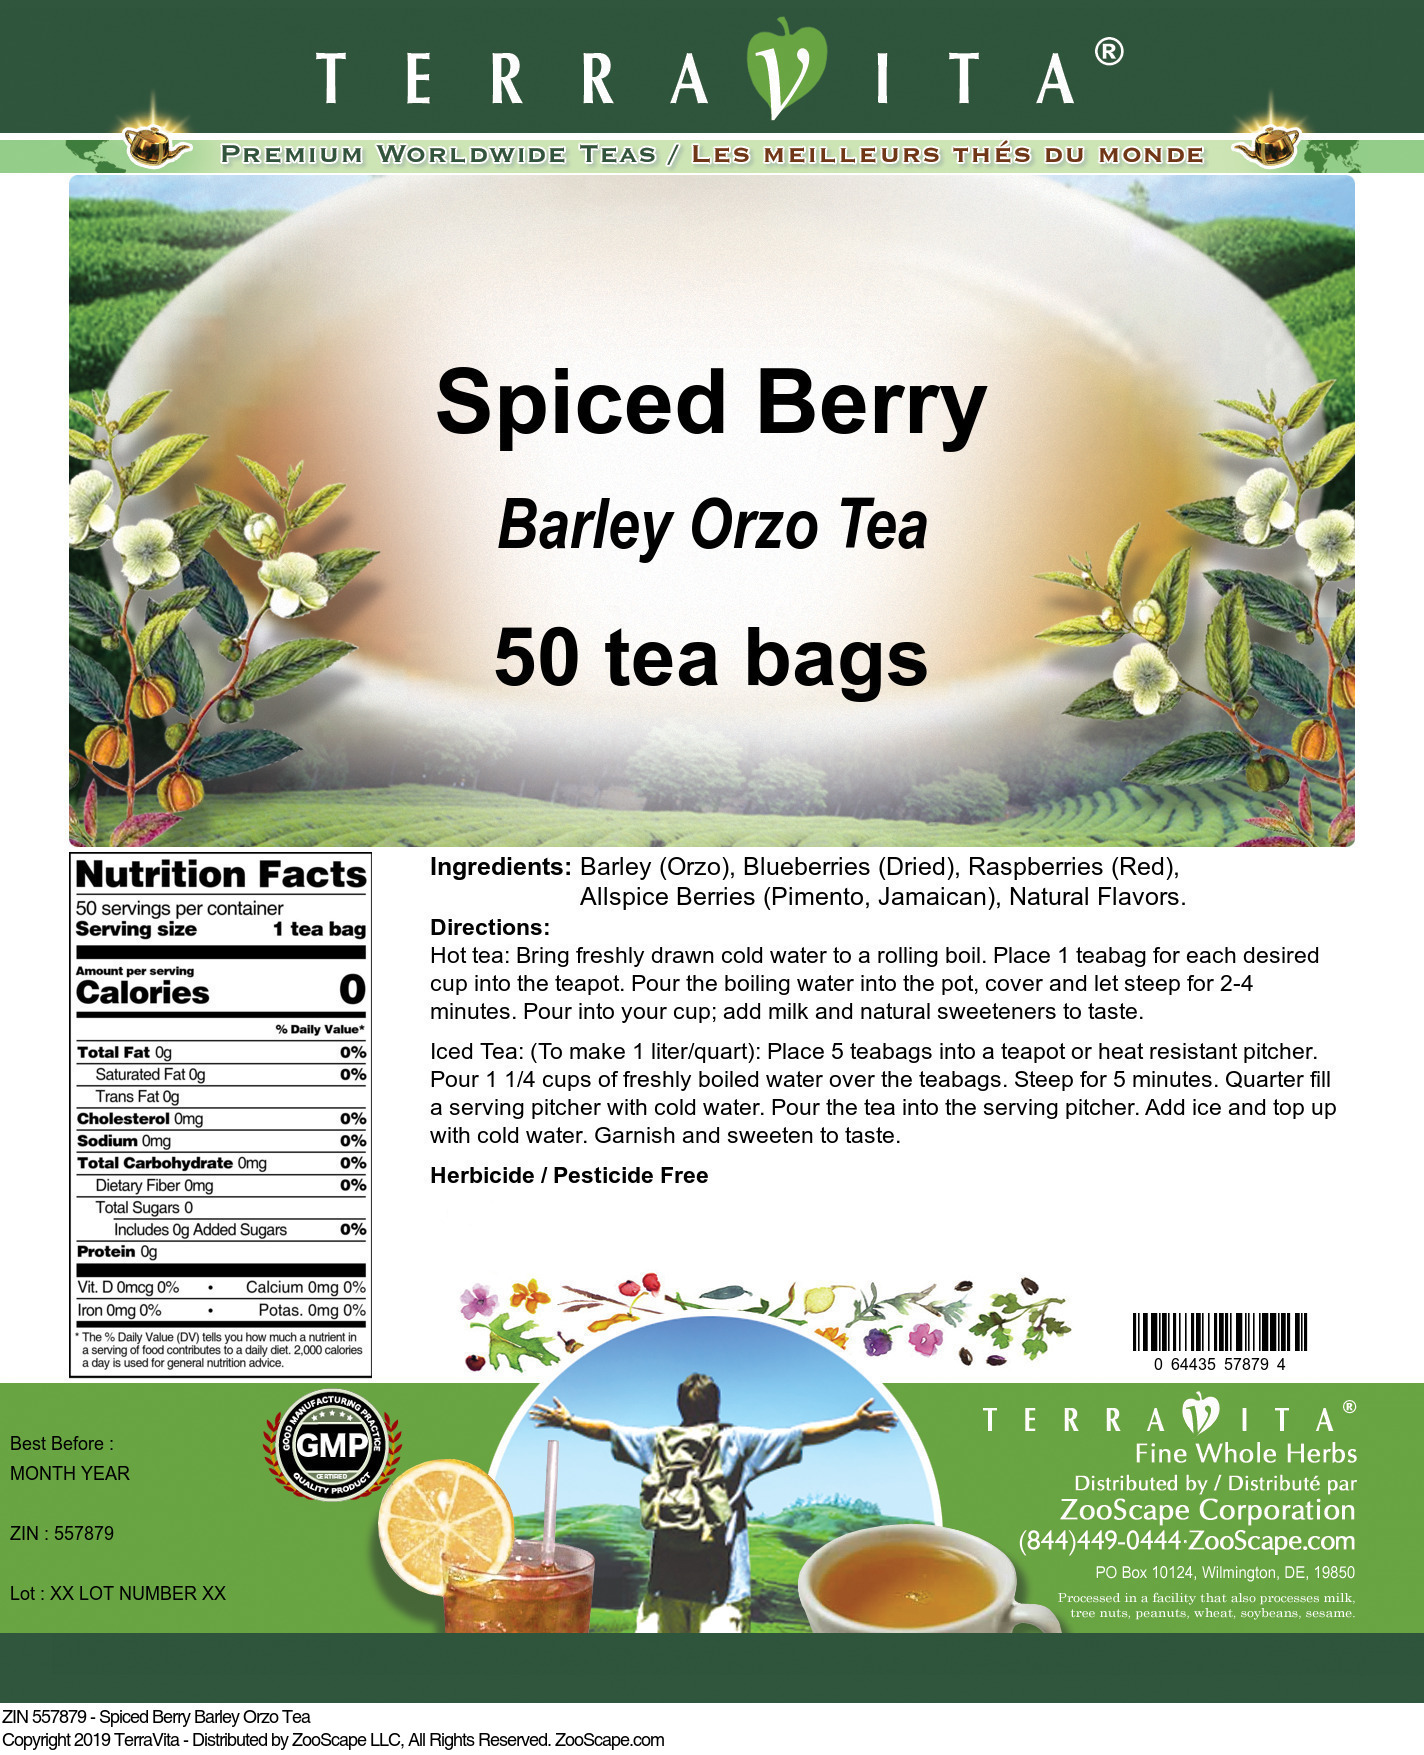 Spiced Berry Barley Orzo Tea - Label